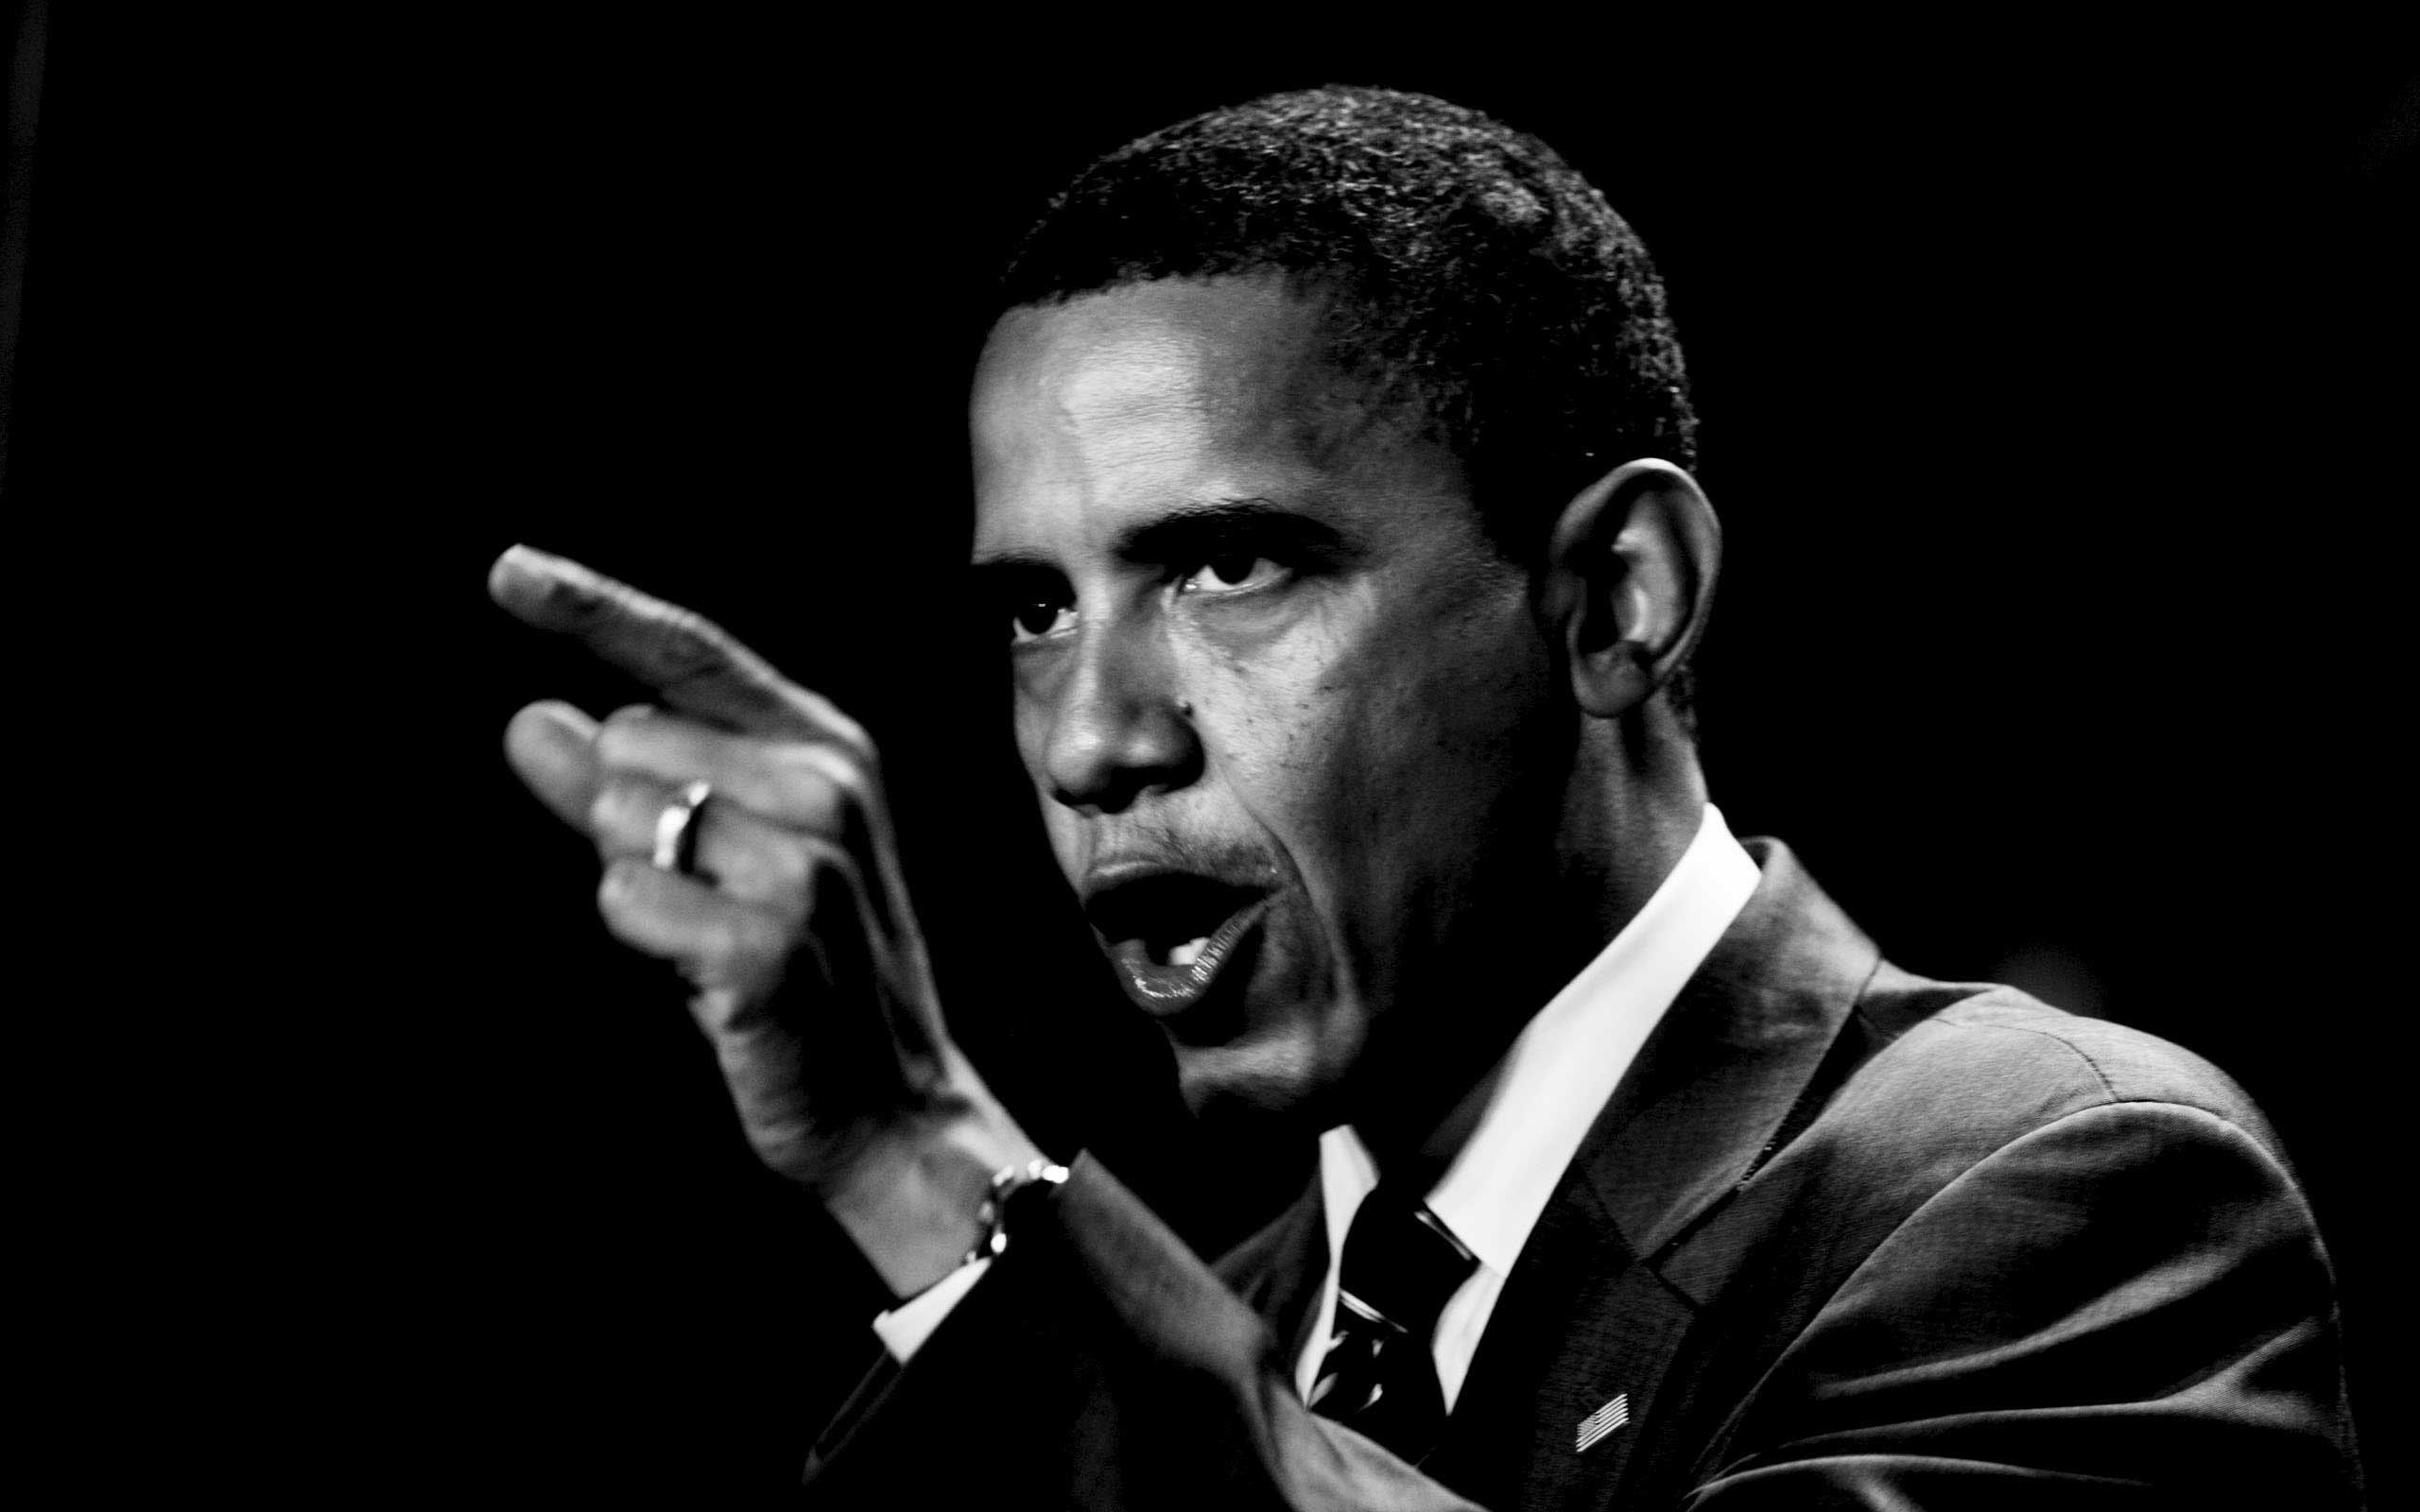 Top Rated 100% Quality HD Barack Obama Image